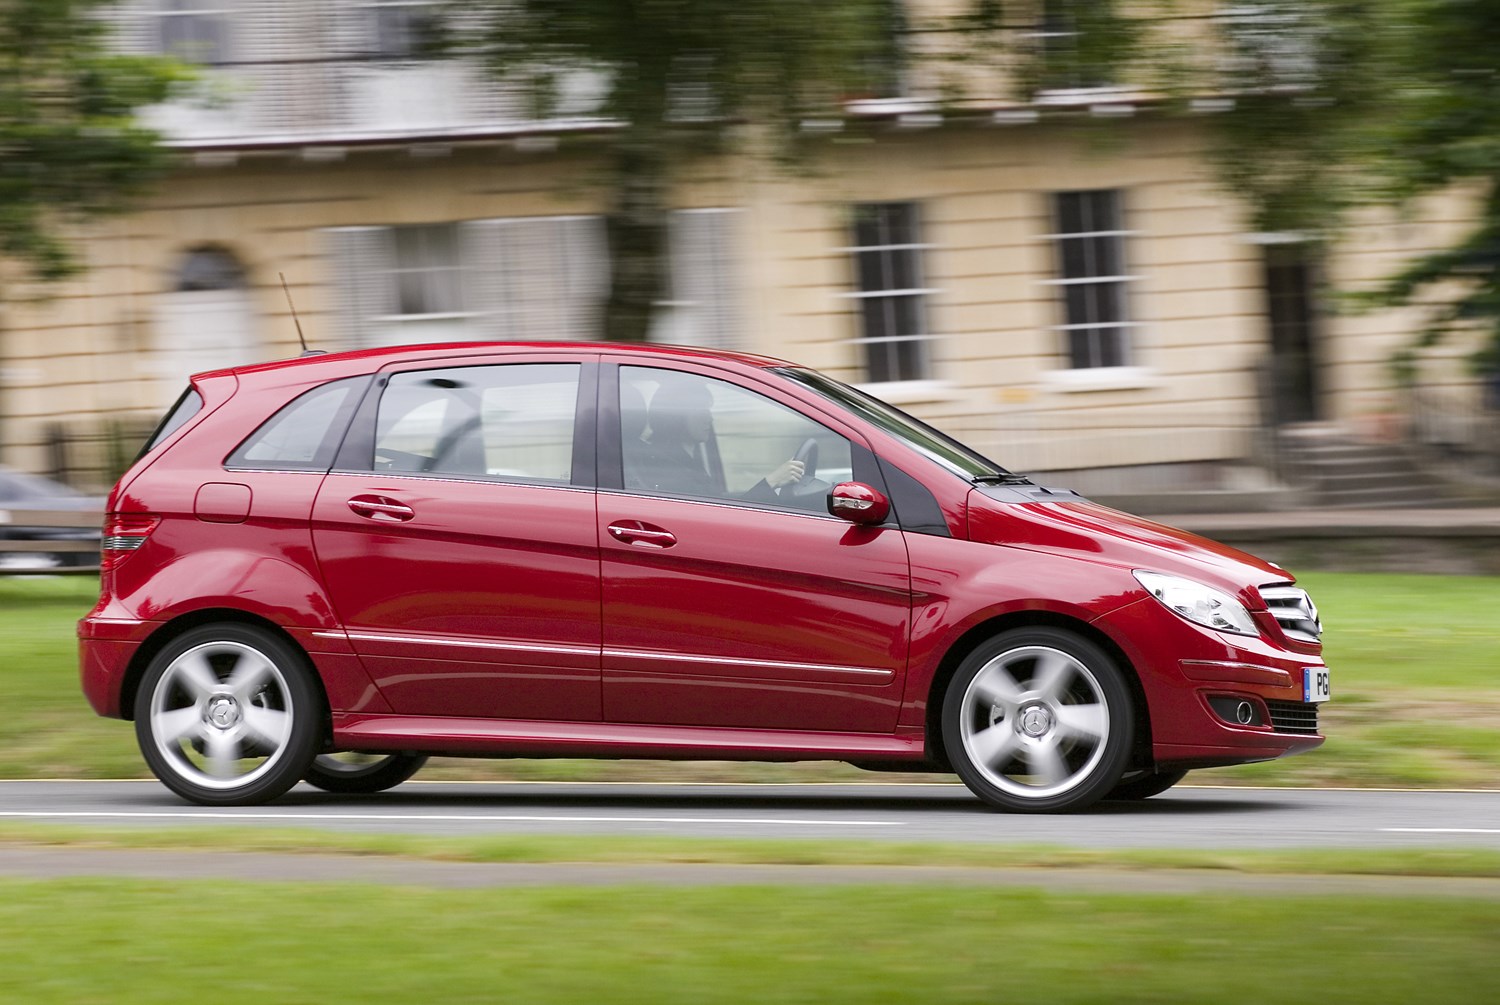 Used Mercedes-Benz B-Class Hatchback (2005 - 2011) Review ...